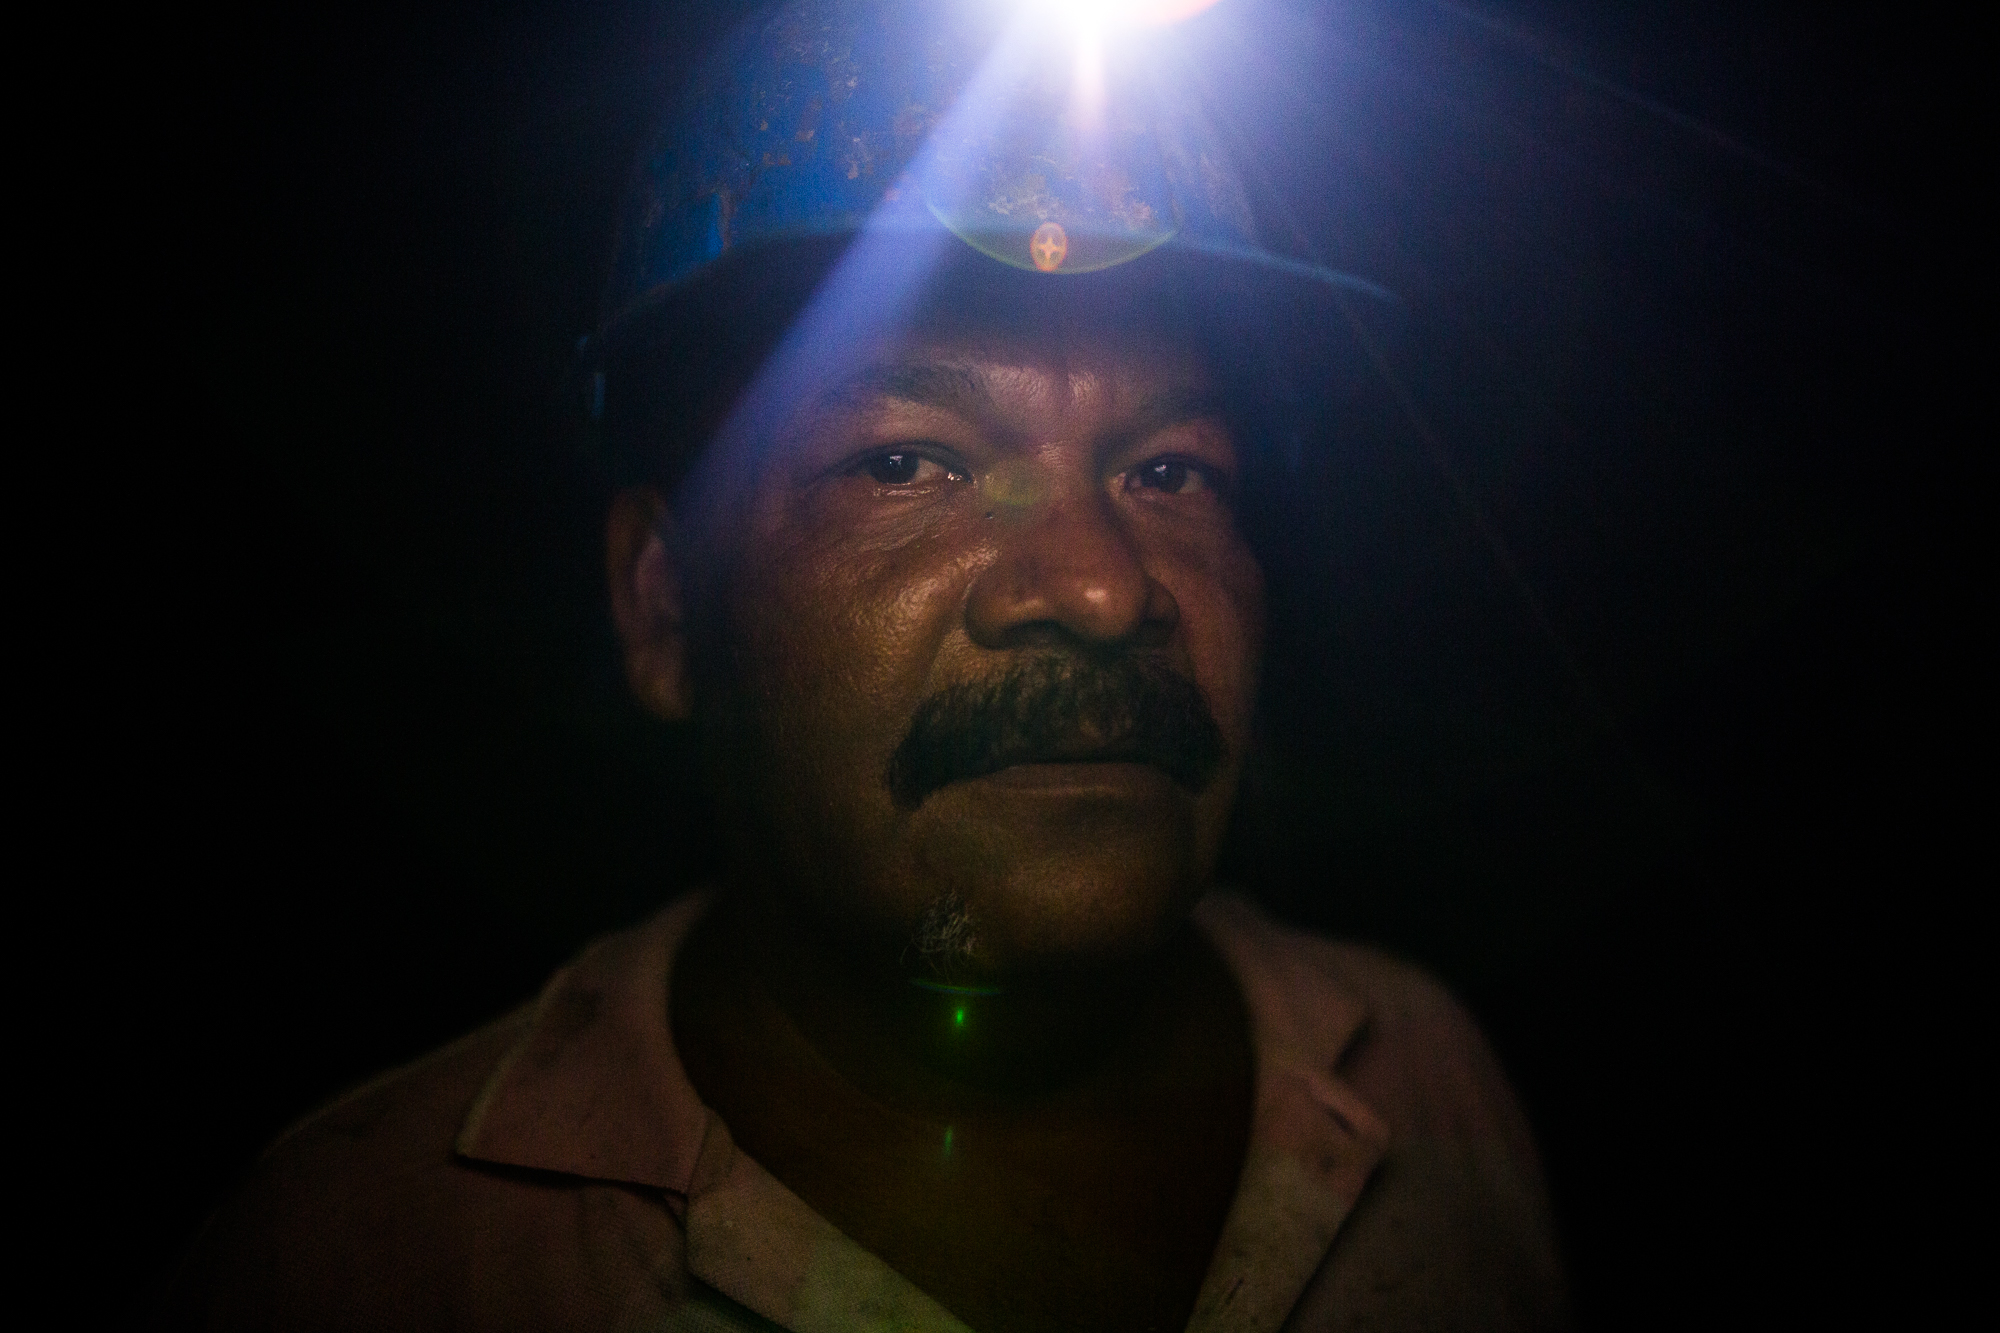     Daniel Ortiz, 48, from Cordoba, Colombia was unemployed on the coast and came to Mina Walter looking for a job. Since May 2016, he has been working to remove stones from the earth. Mina Walter South Bolivar, Colombia. May 12, 2017 